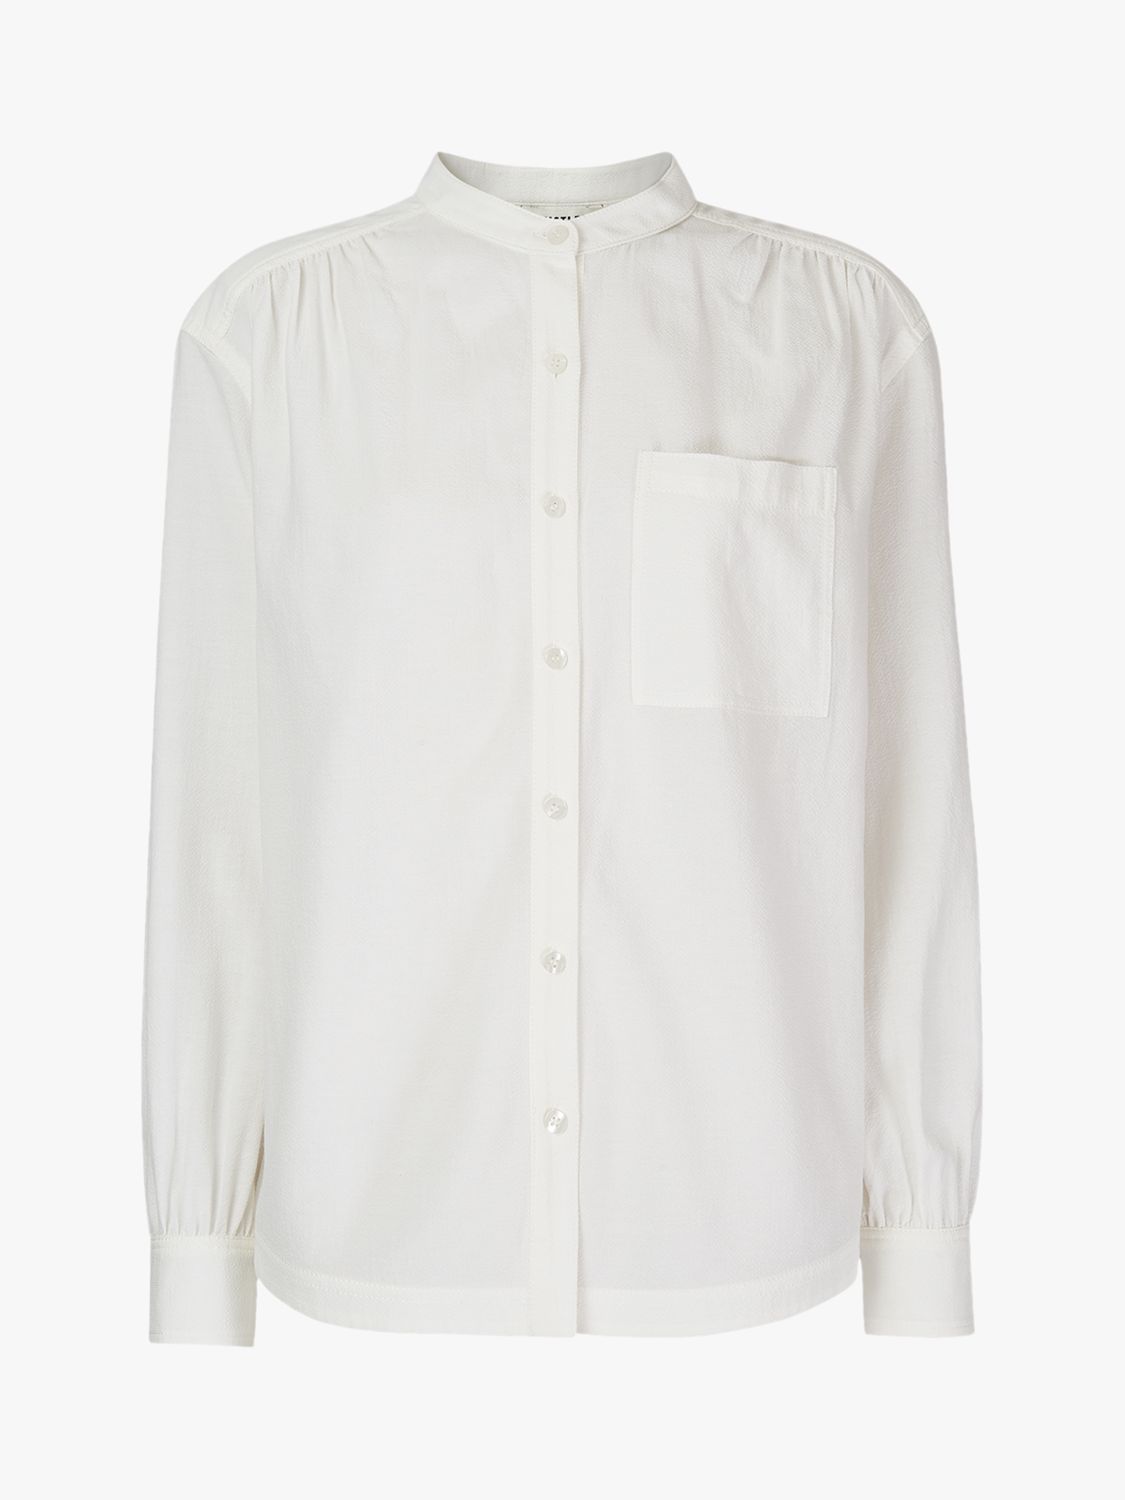 Whistles Textured Long Sleeved Shirt, Ivory